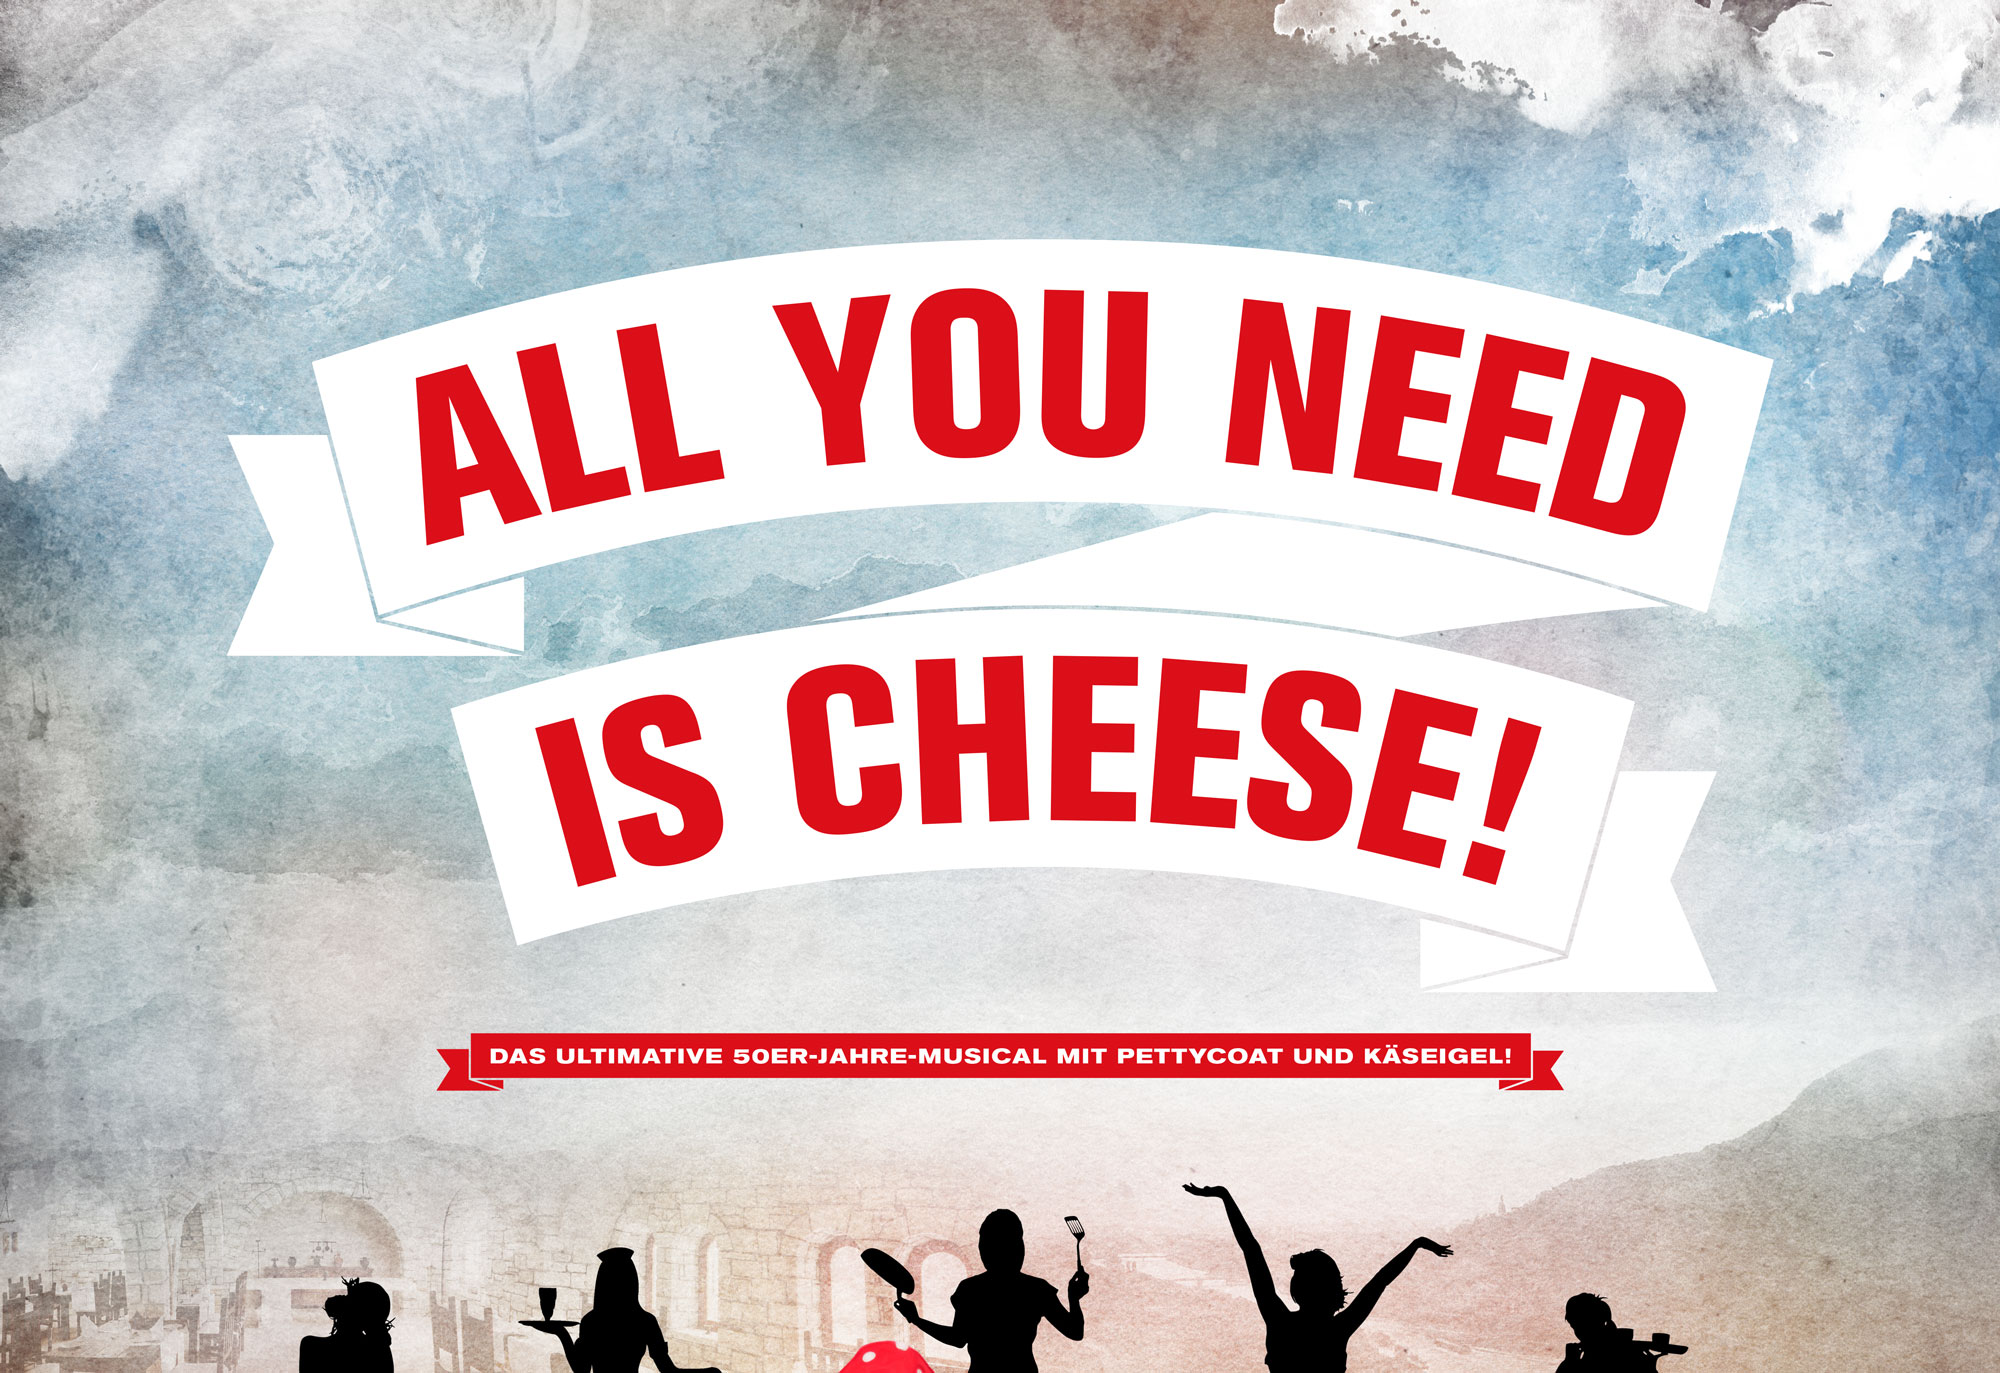 All you need is Cheese